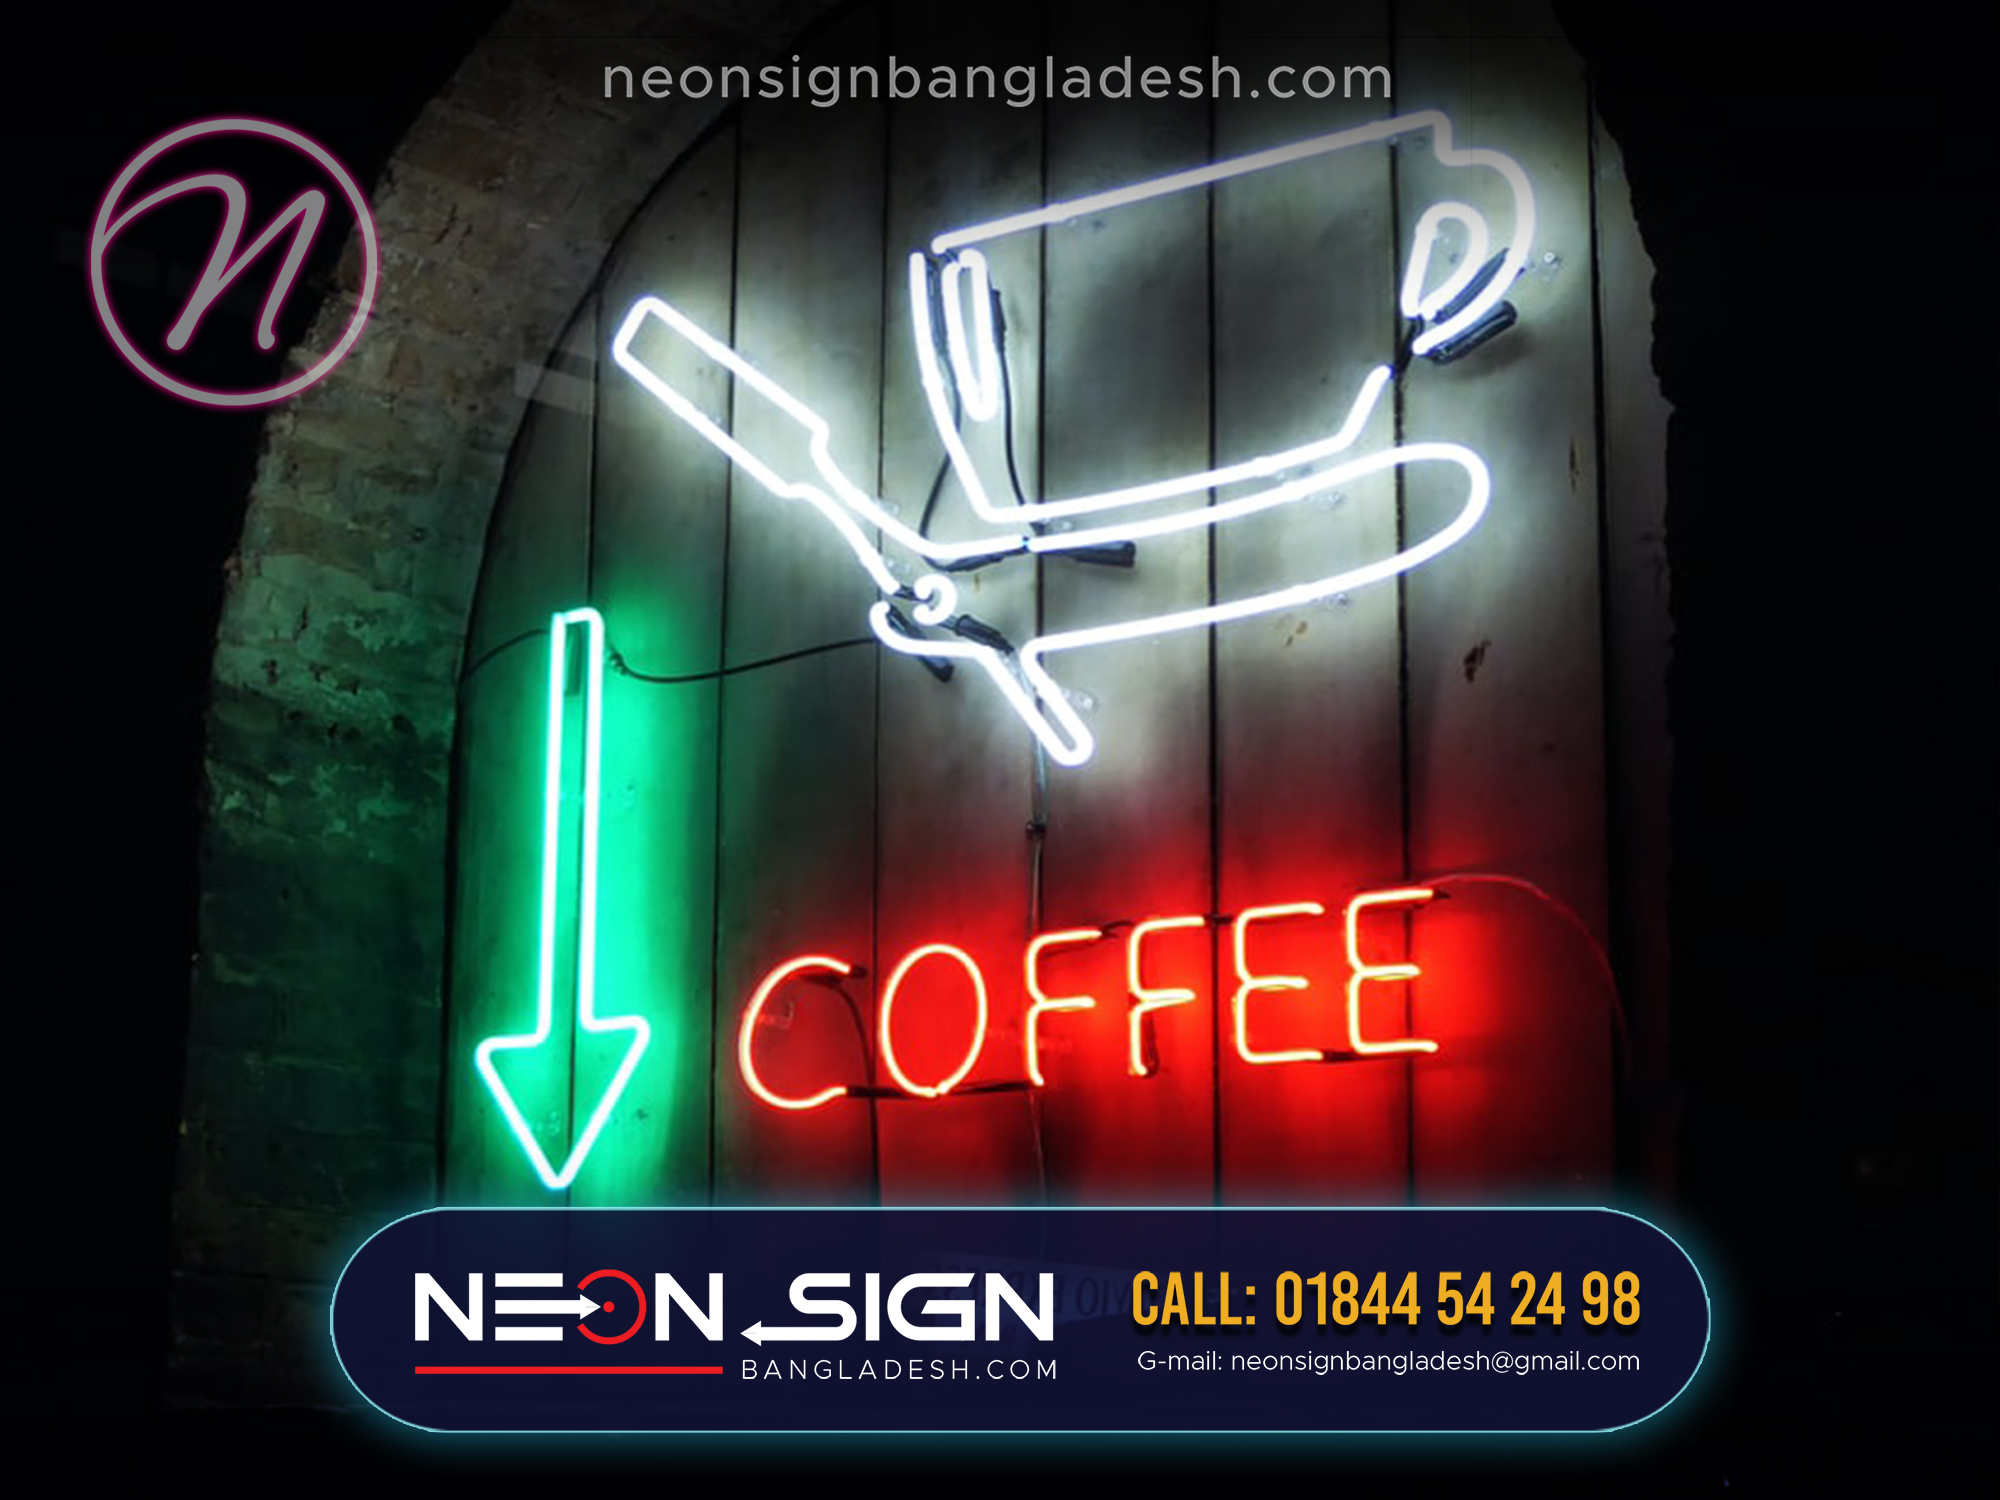 neon letter signage in Bangladesh, neon sign price bd, Best Neon Sign Company in Bangladesh. Top 10 Neon Signage Agency in Dhaka Bangladesh. Neon Advertising Agency Dhaka Bangladesh.